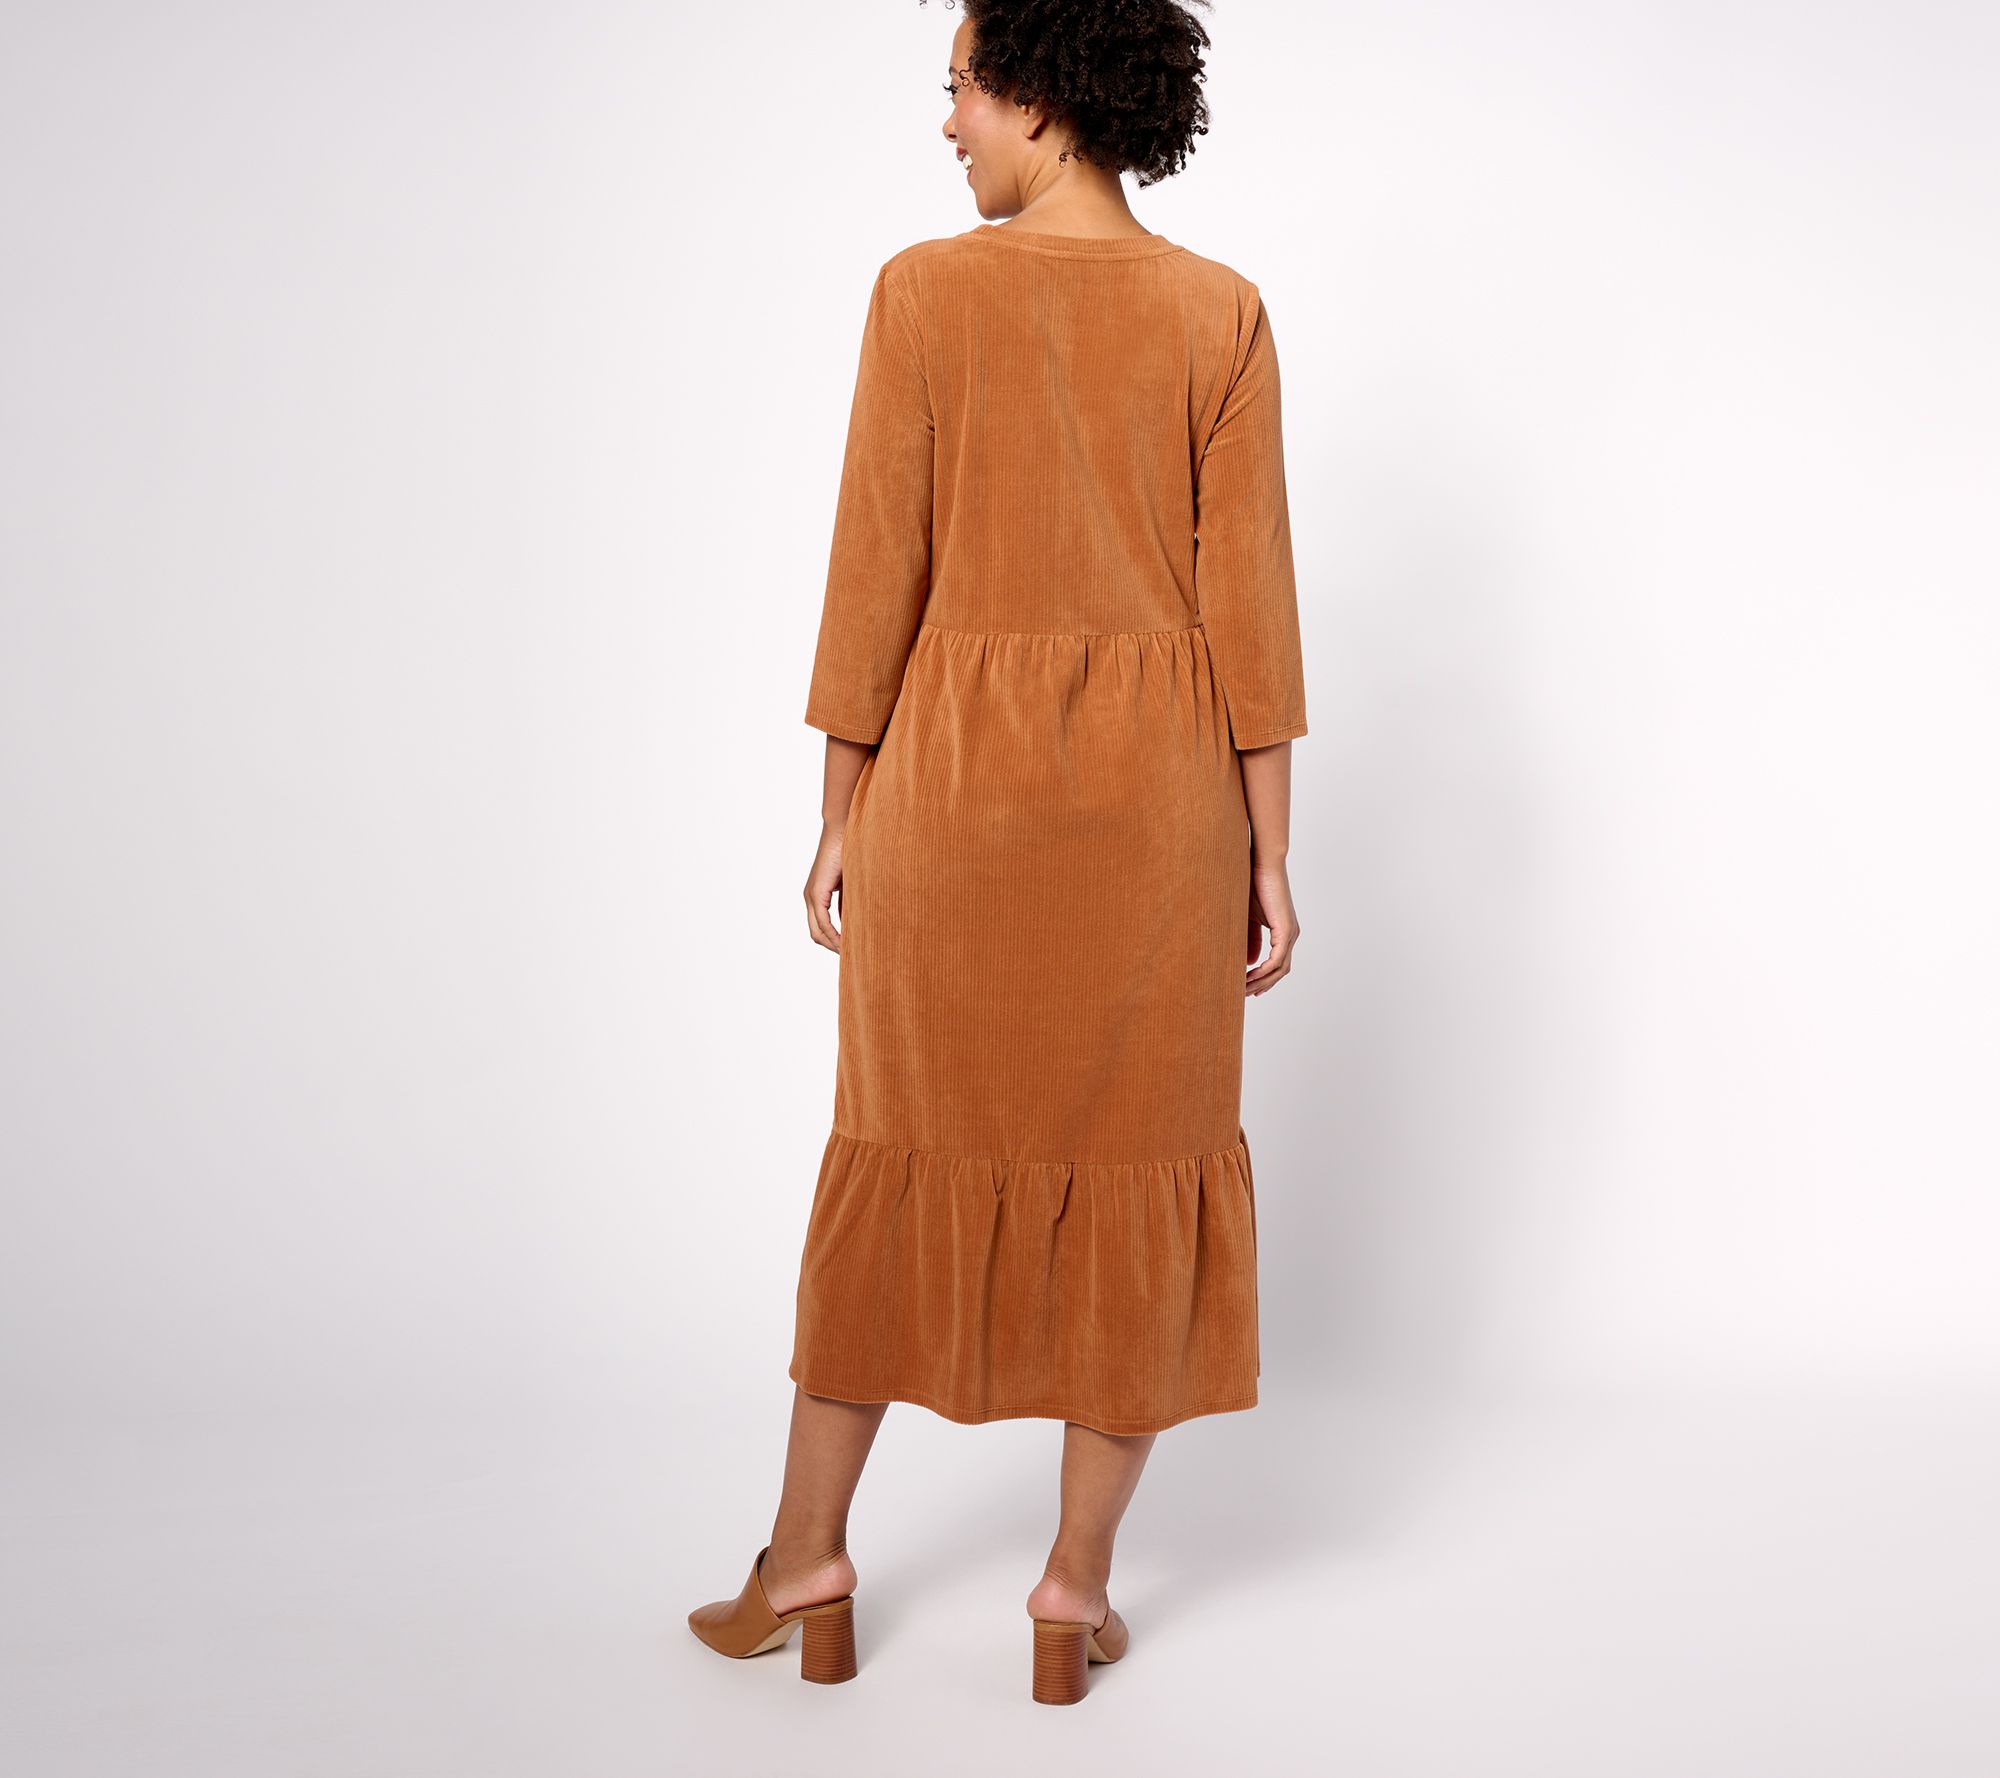 H&M launches 50% off sale including midi dresses perfect for spring -  Mirror Online